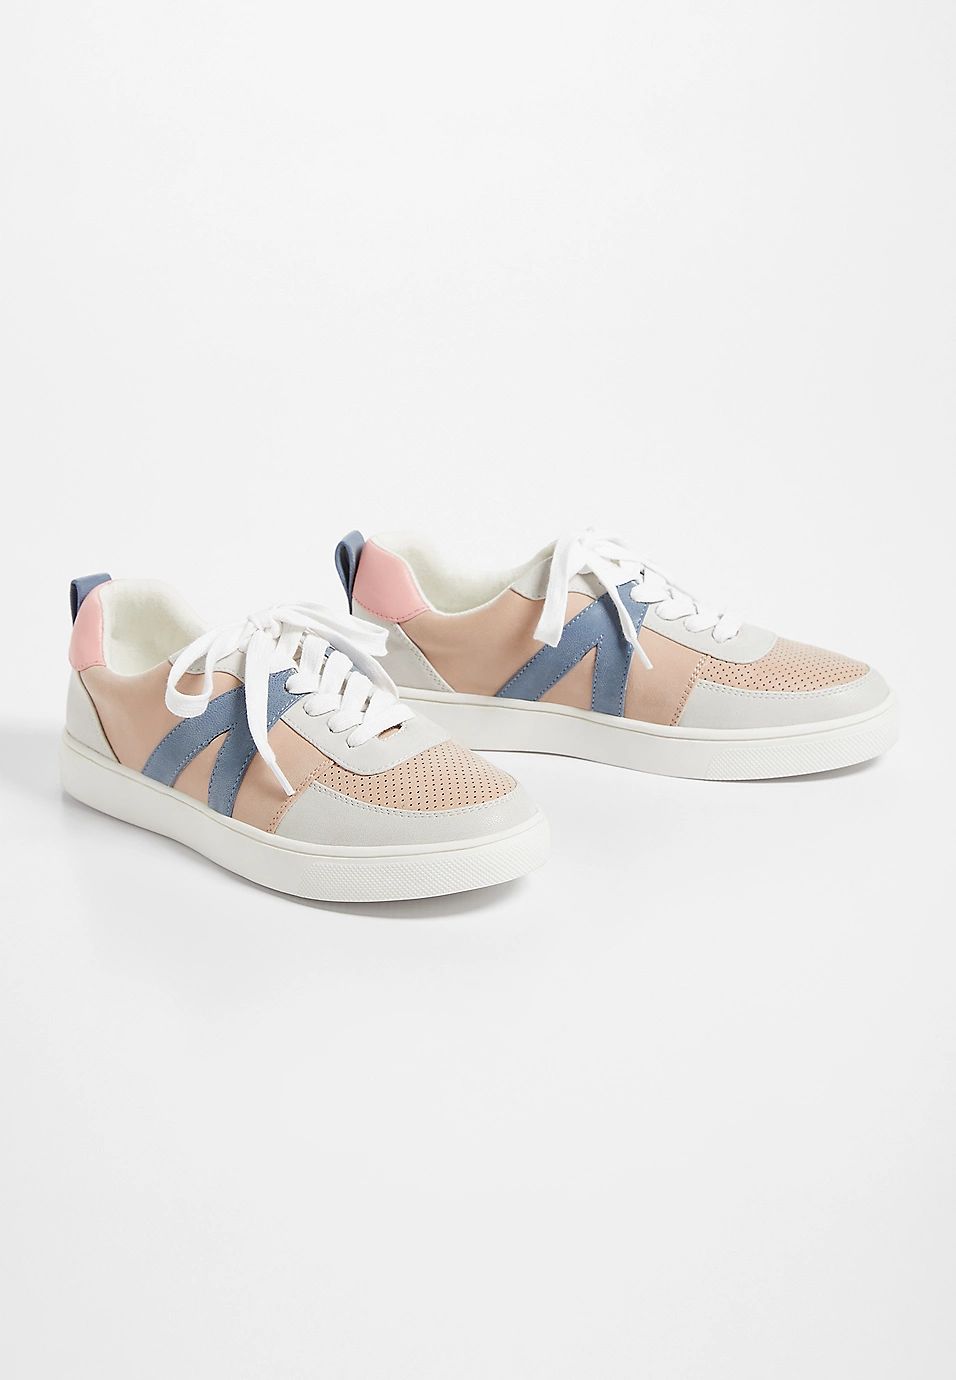 Shelby Blush Colorblock Lace Up Sneaker | Maurices